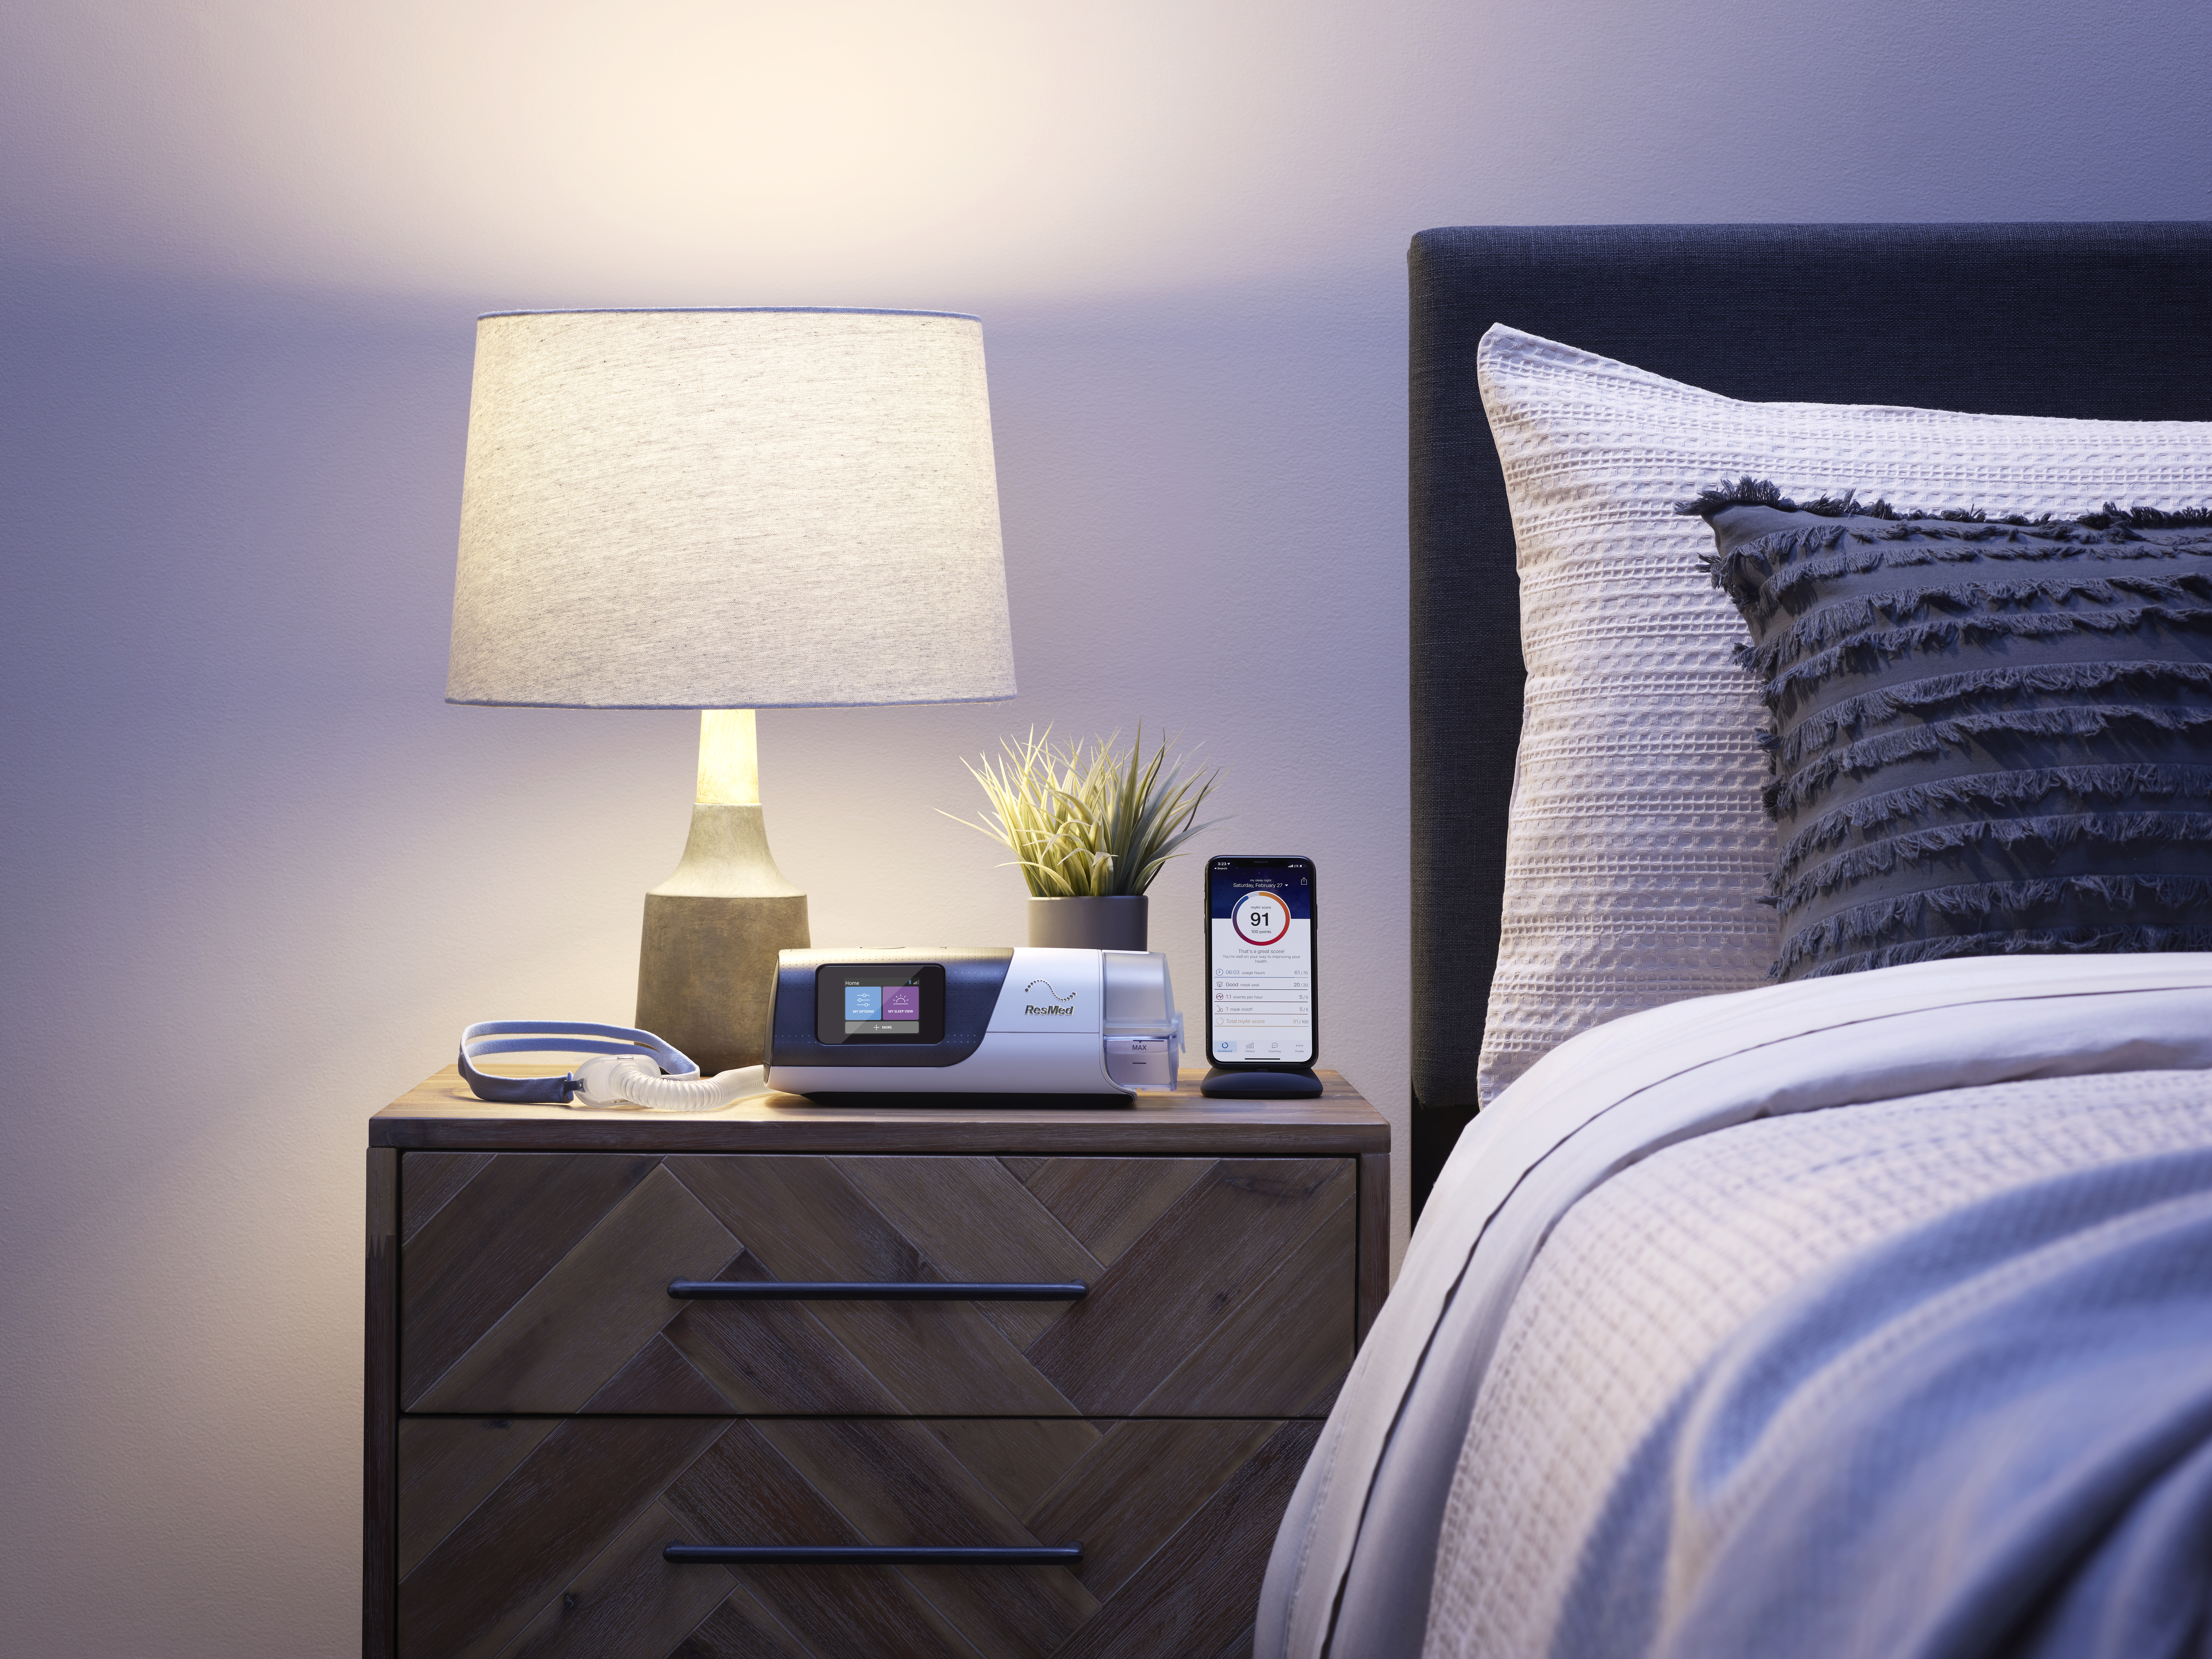 AirSense 11 PAP with Nasal Pillow Mask on Nightstand